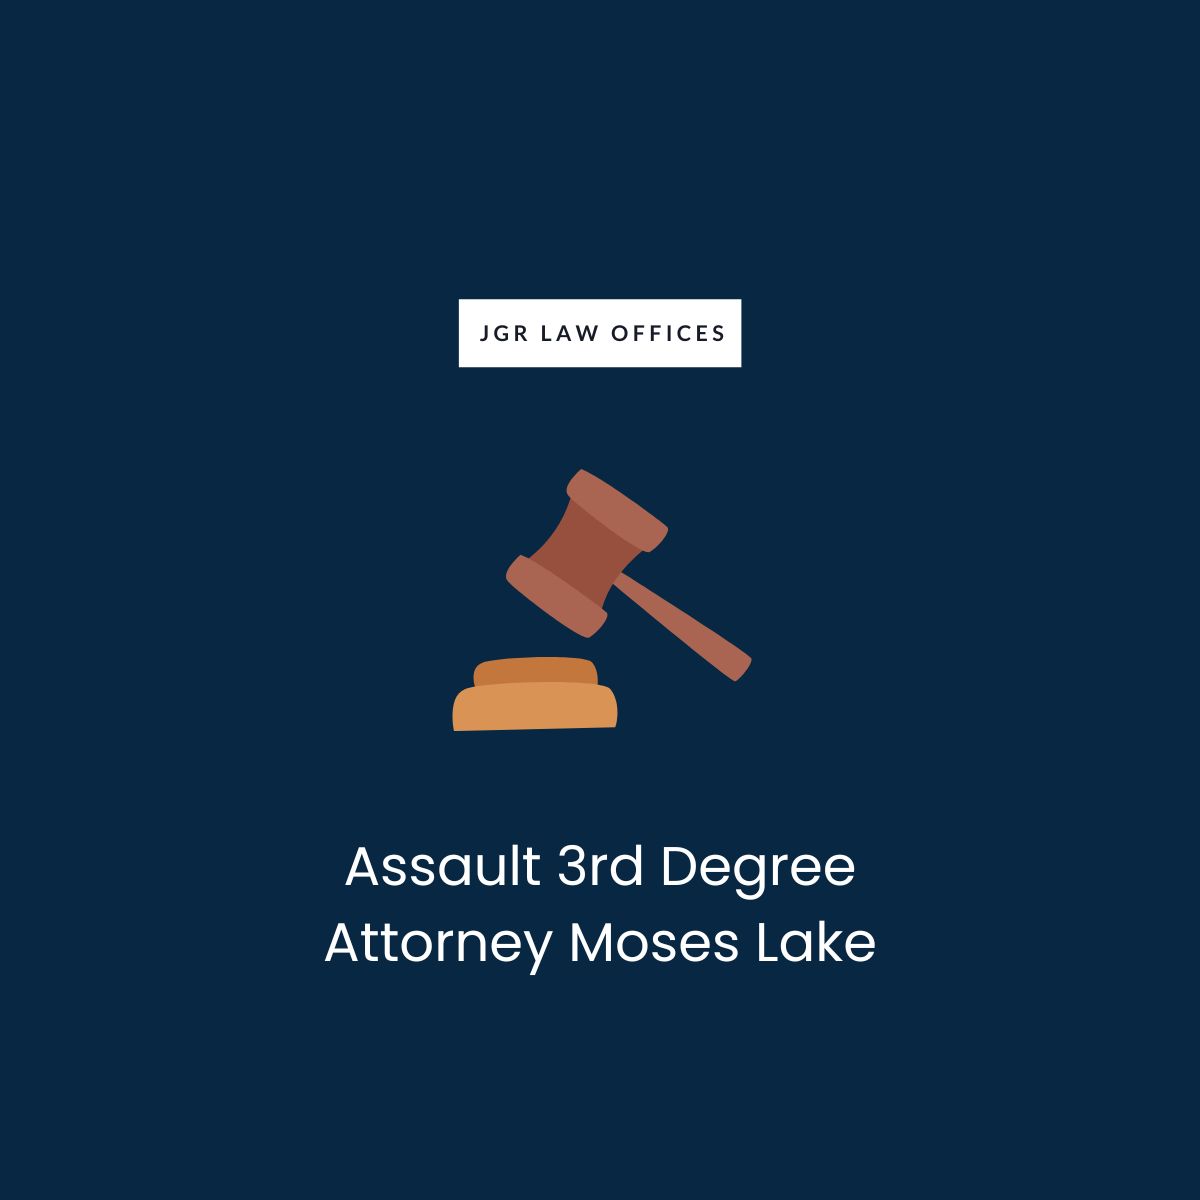 Assault 3rd Degree Attorney Moses Lake